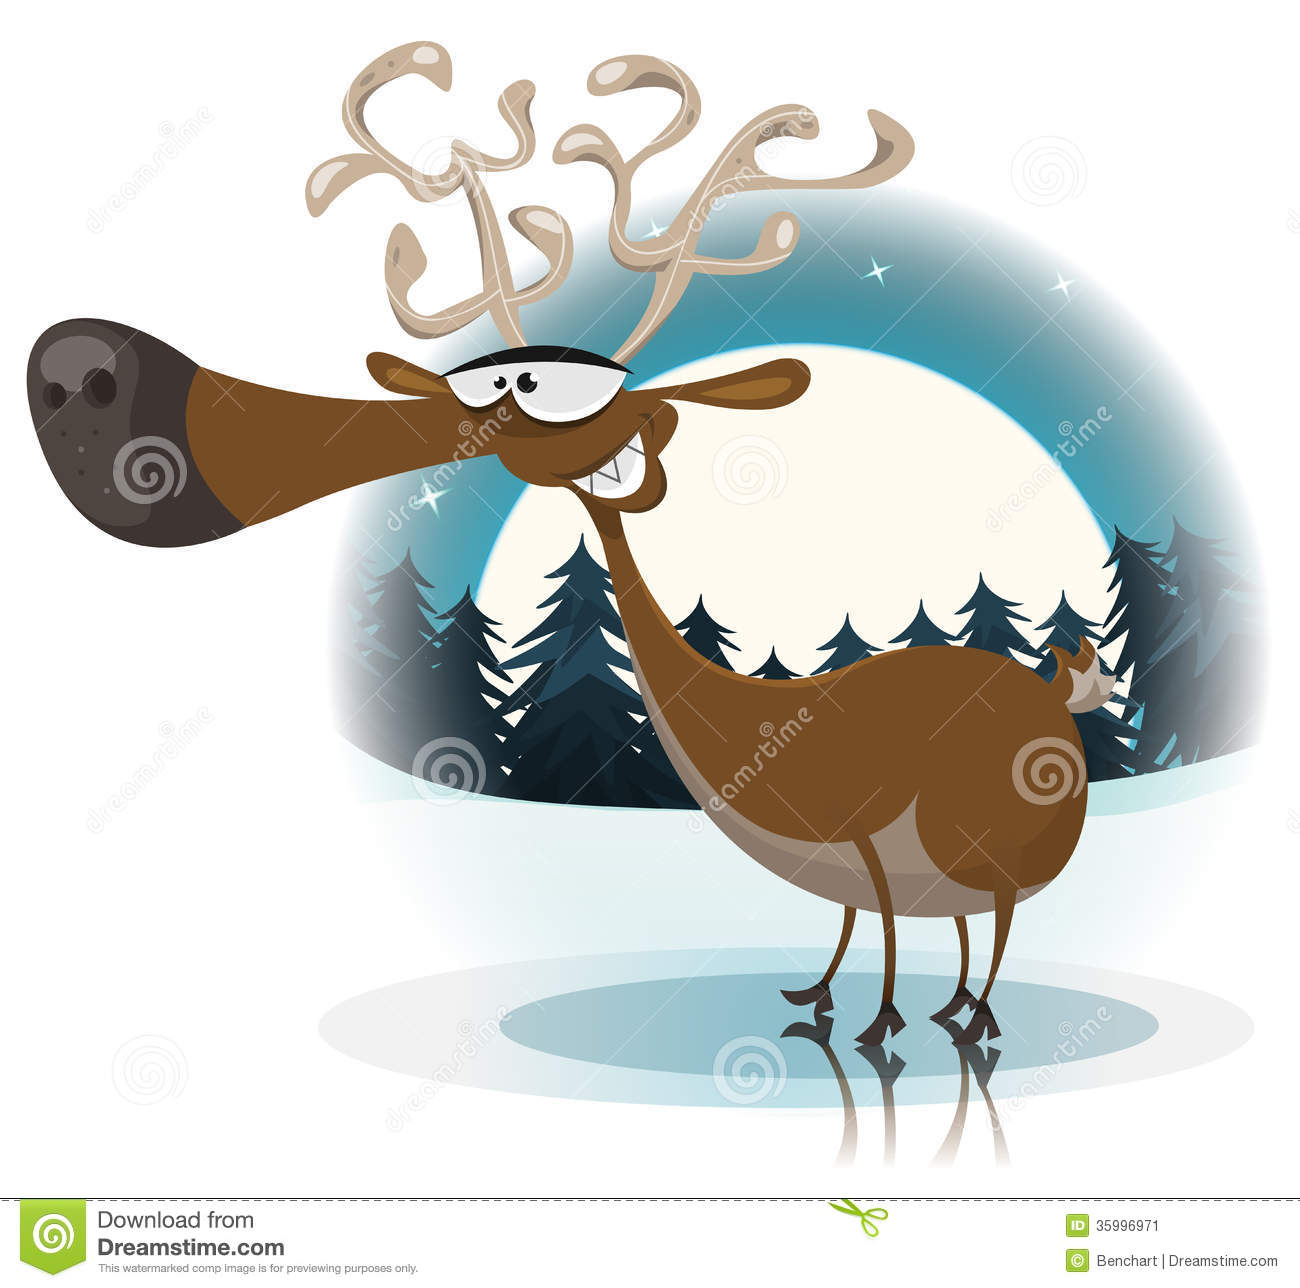 Illustration Of A Cartoon Funny Happy Christmas Reindeer Character On